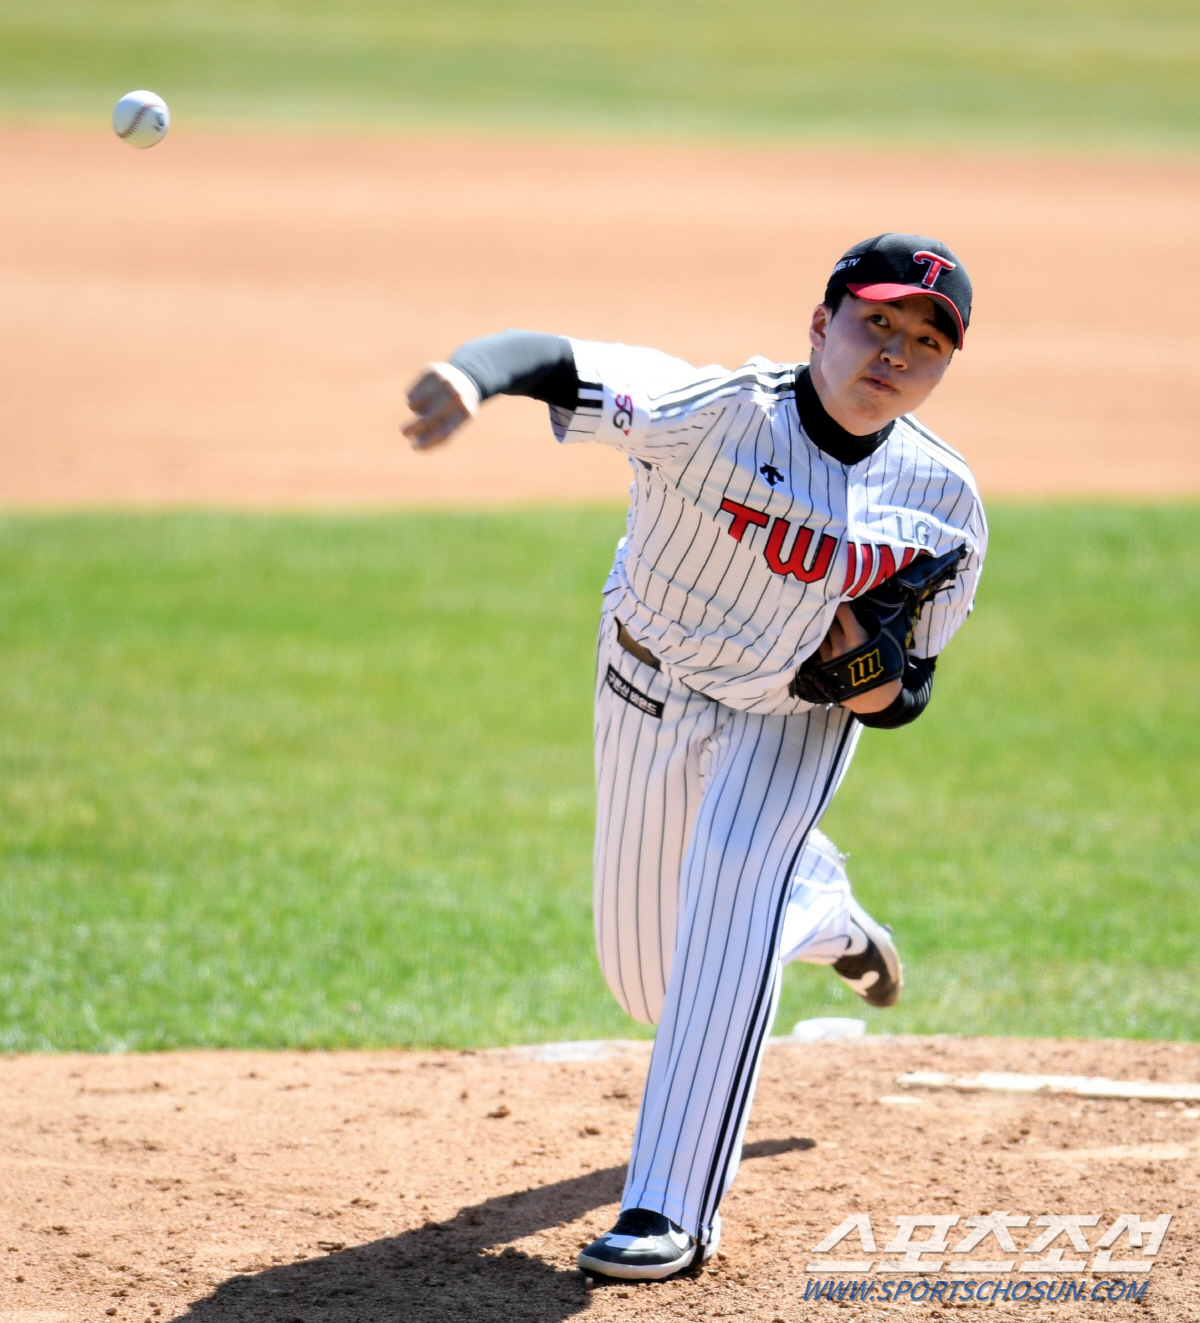 This is Jamsil-dong and youre a pro.The LG Twins made their first appearance on the Jamsil-dong mound this year.Lee Min-ho, the first rookie of the year, and Kim Yun-stock, the second left-hander, said, This year, all of the new players are coming out.Its my first start in the Jamsil-dong.First on the mound is Kim Yun-stock, who pitched as the second pitcher for the Blue Team, giving up three hits in two innings and blocking him without a run.He pitched well in the first inning and one hit in the first inning in Icheon on the 17th, and raised expectations for 2Kyonggi consecutive coaching staff.Kim Yun-stock also showed off his sense of stability by freely spraying all his own species including curves, sliders, and change-ups, including the maximum 142km The.He pitched 25 balls against eight batters, and there were no four.Kim Yun-stock hit a left-handed hit in the third inning against Yu Kang Nam and Jung Ju-hyeon in the first inning, throwing The into the first baseman fly and then throwing 141km The to Lee Chun Woong.He also allowed a heavy hitter to the Hyun-soo Kim, but the batter was out of second base and kept the innings scoreless.In the fourth inning, Che Eun Seong and Kim Ho-eun were treated as first baseman grounders and shortstop straight hits, respectively, and then gave Kim Min-sung a heavy hit, but he overcame Jeon Min-soo with a right fielder.Lee Min-ho made his first start in the fifth inning after Kim Yun-stock; the pitching content was unsettling; he had four hits in one inning and two runs.The speed remained 144–147 km, but there were many balls in the middle; 21 pitches and one strikeout.1 after throwing 145km The to Yu Kang Nam, he was hit by a double in the middle.Jung Ju-hyeon was struck out with a 147km The, but Lee Chun Woong allowed a surprise bunt hit on the third base and was driven to the first and third bases.Lee Min-ho gave up a right-handed hit to the 144-kilometer The in the middle of the game to Hyun-soo Kim, and scored an additional one run by hitting a left-hand double to Che Eun Seong in the first and second bases of the second inning.Both players reportedly dreamed of a Jamsil-dong mound as amateurs; Kim Yun-stock, after Kyonggi, said: Pro seniors are really different.Lee Chun Woongs senior hit (three innings) was impressive.I felt it today that I had to have a few balls and I should not throw it in the middle.  I felt that Jamsil-dong was very big. Lee Min-ho said, The opportunity to start baseball was after seeing Kyonggi here when I was young.It was pleasant to pitch in Jamsil-dong, and I tried to concentrate, he said. Of course, I dealt with batters I have not experienced before.I thought this was a professional, I think, when I was dealing with Yu Kang Nam Hyun-soo Kim Che Eun Seong.